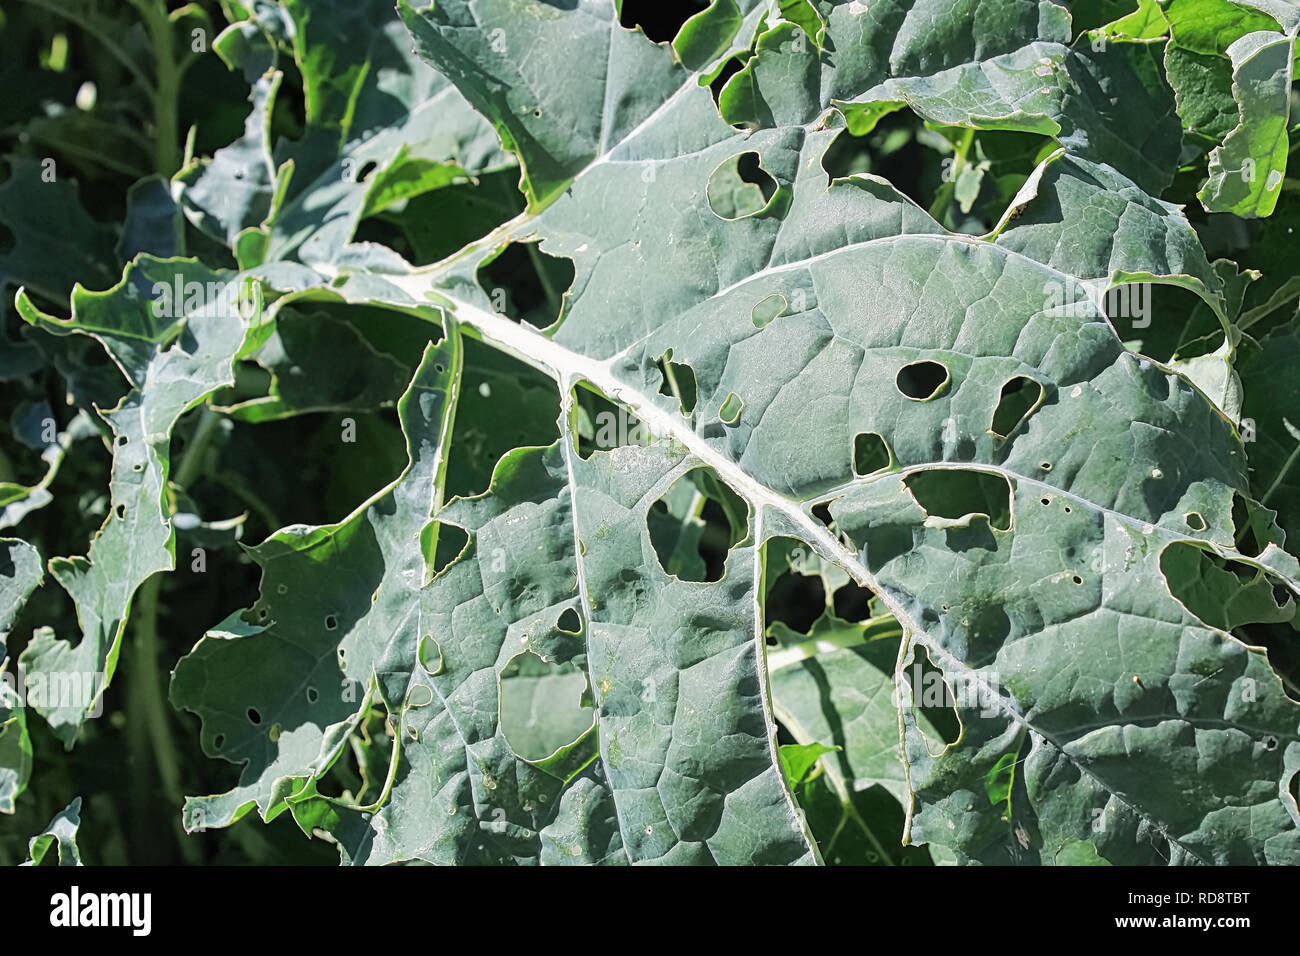 Cabbage Moth damage seen on broccoli leaves. Stock Photo